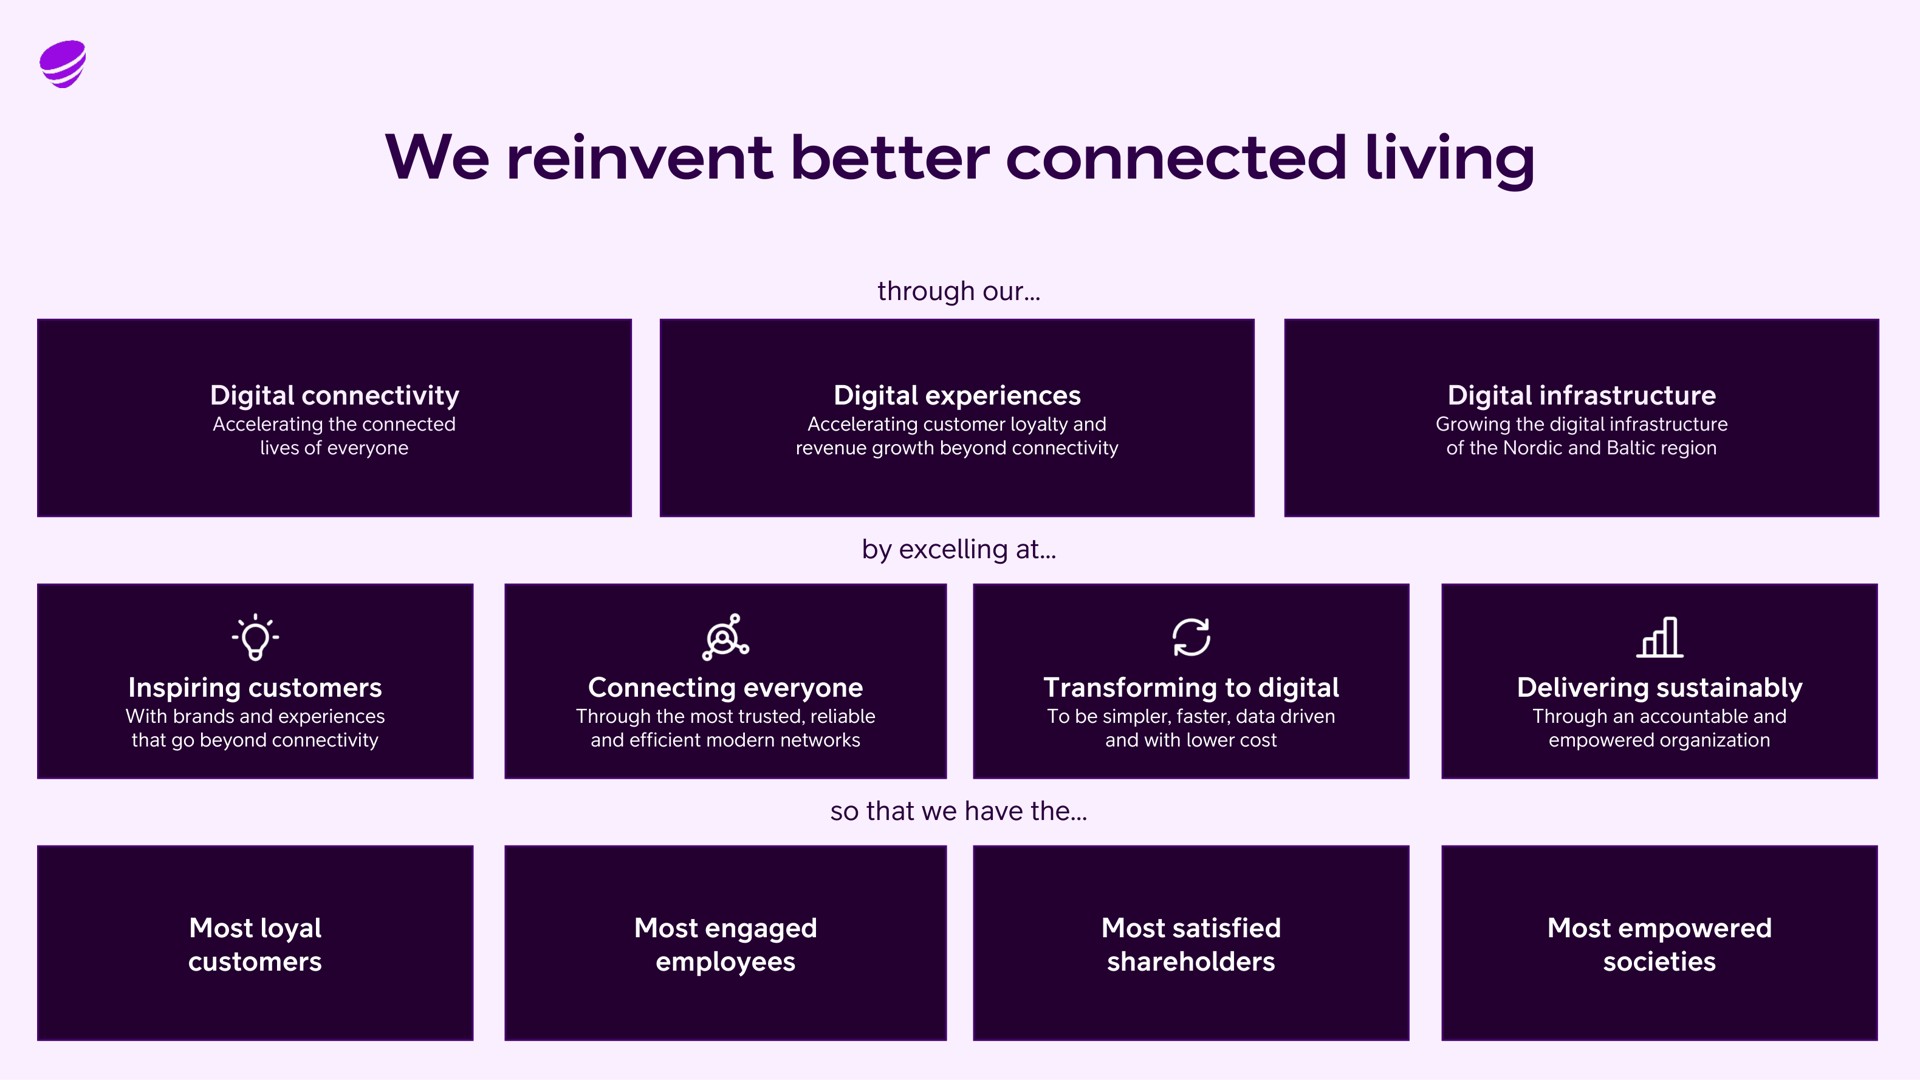 we reinvent better connected living through our digital connectivity digital experiences digital infrastructure by excelling at inspiring customers connecting everyone transforming to digital delivering so that we have the most loyal customers most engaged employees most satisfied shareholders most empowered societies | Telia Company